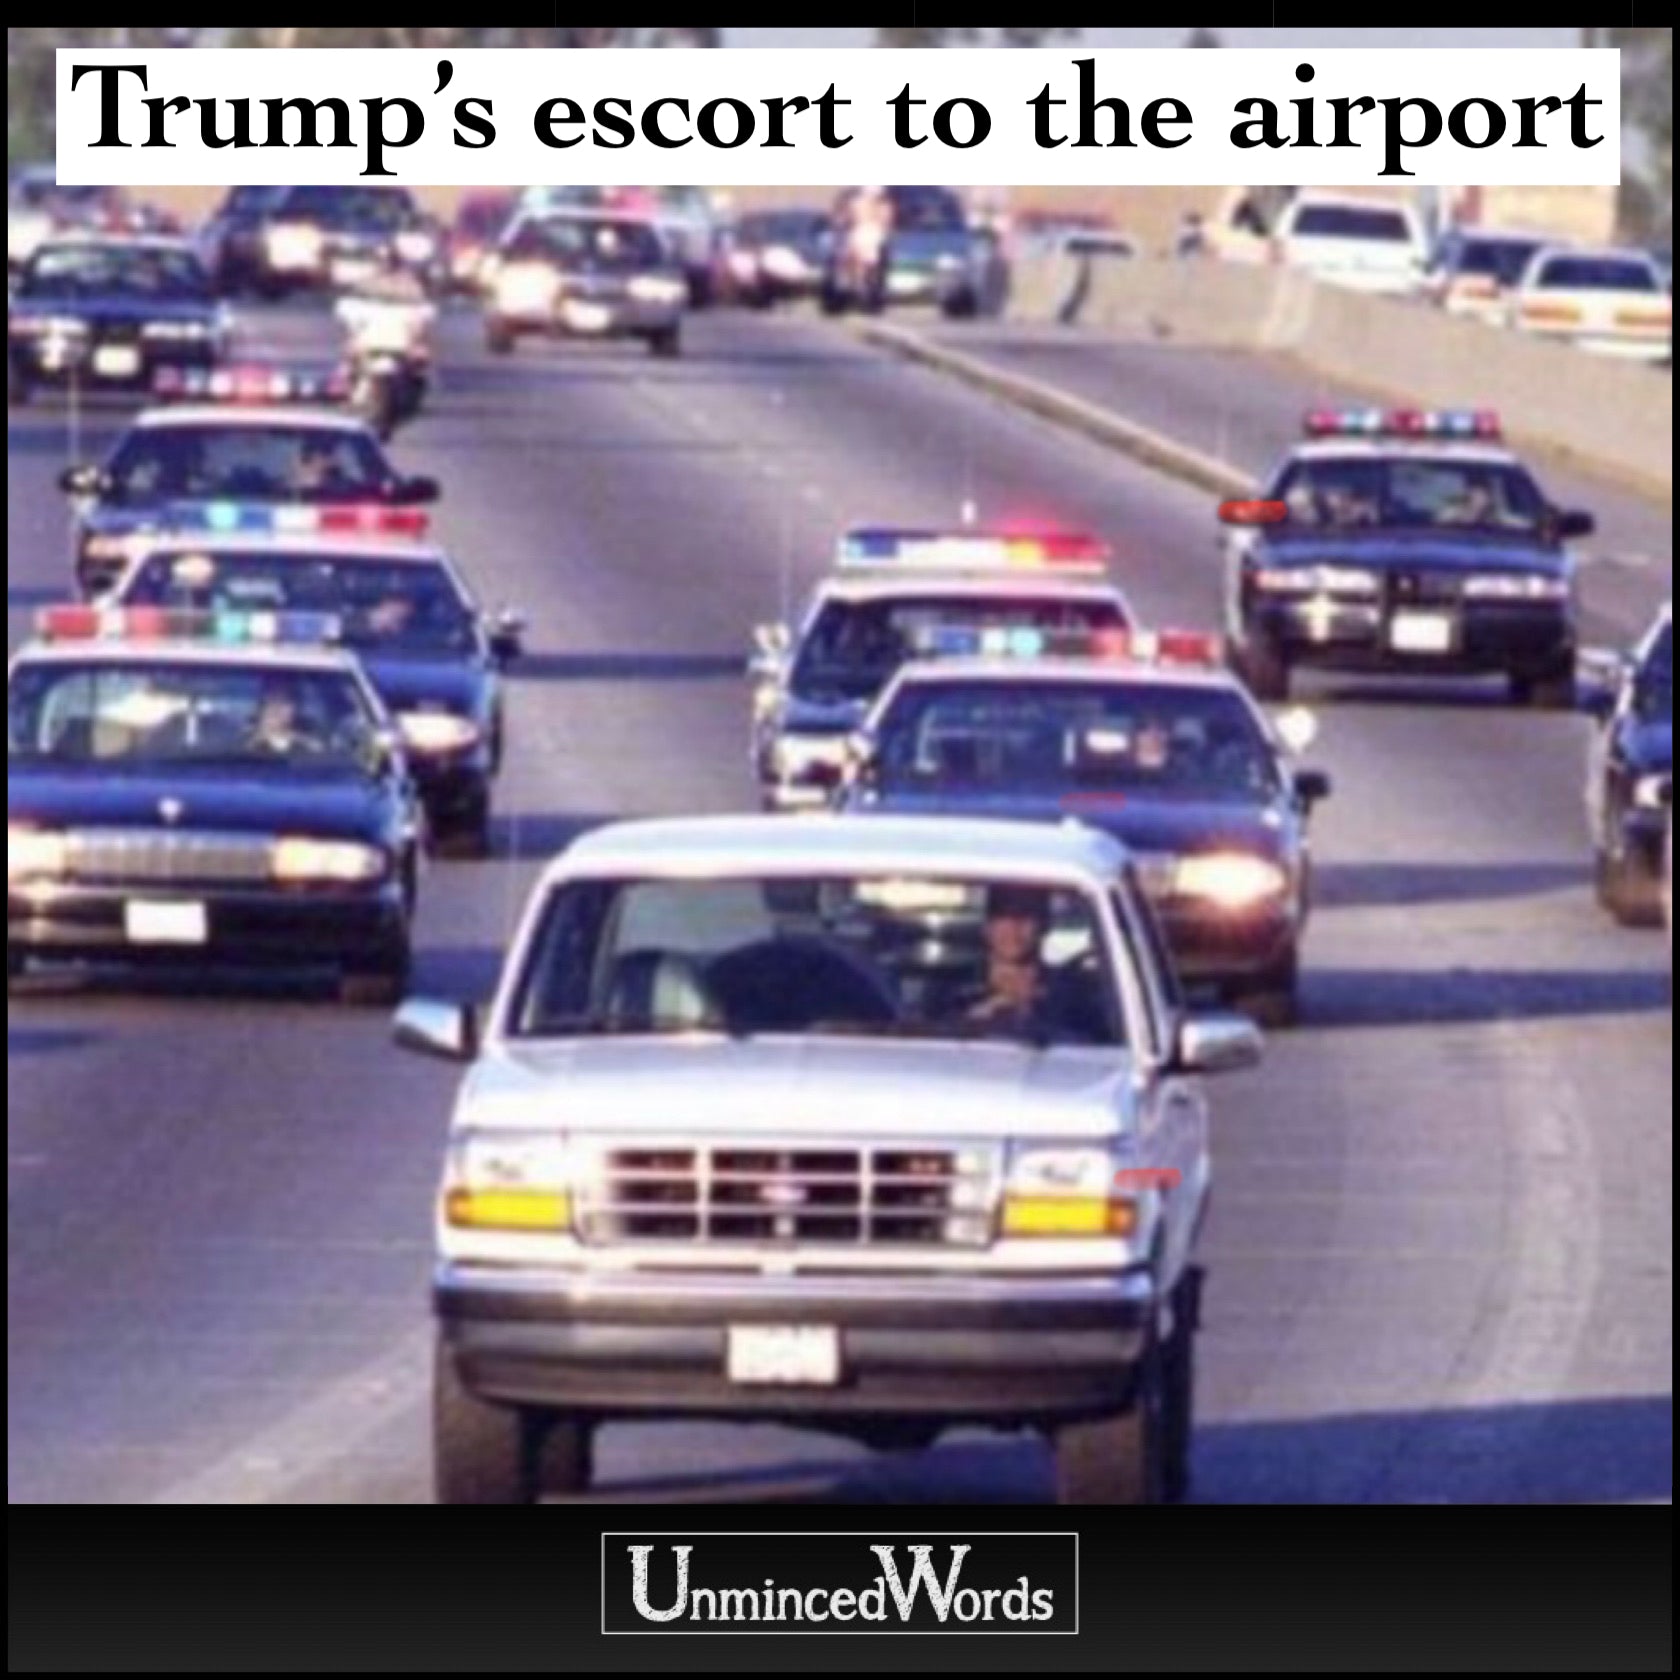 Trump’s escort to the airport.